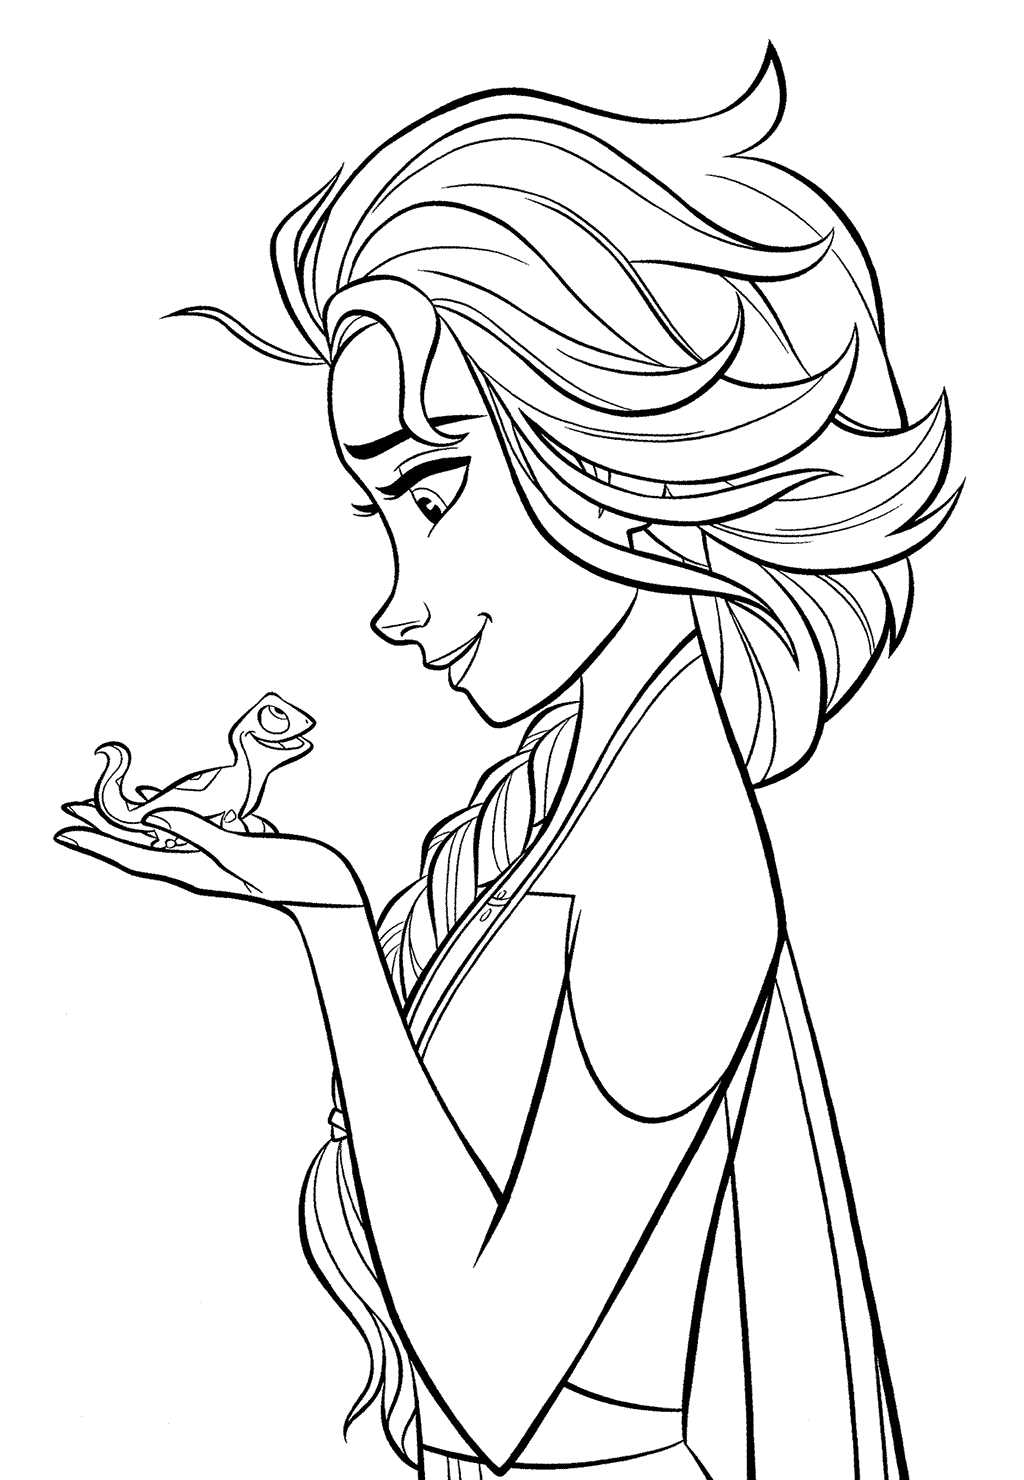 Elsa And Lizard Bruni Frozen 2 Coloring Page